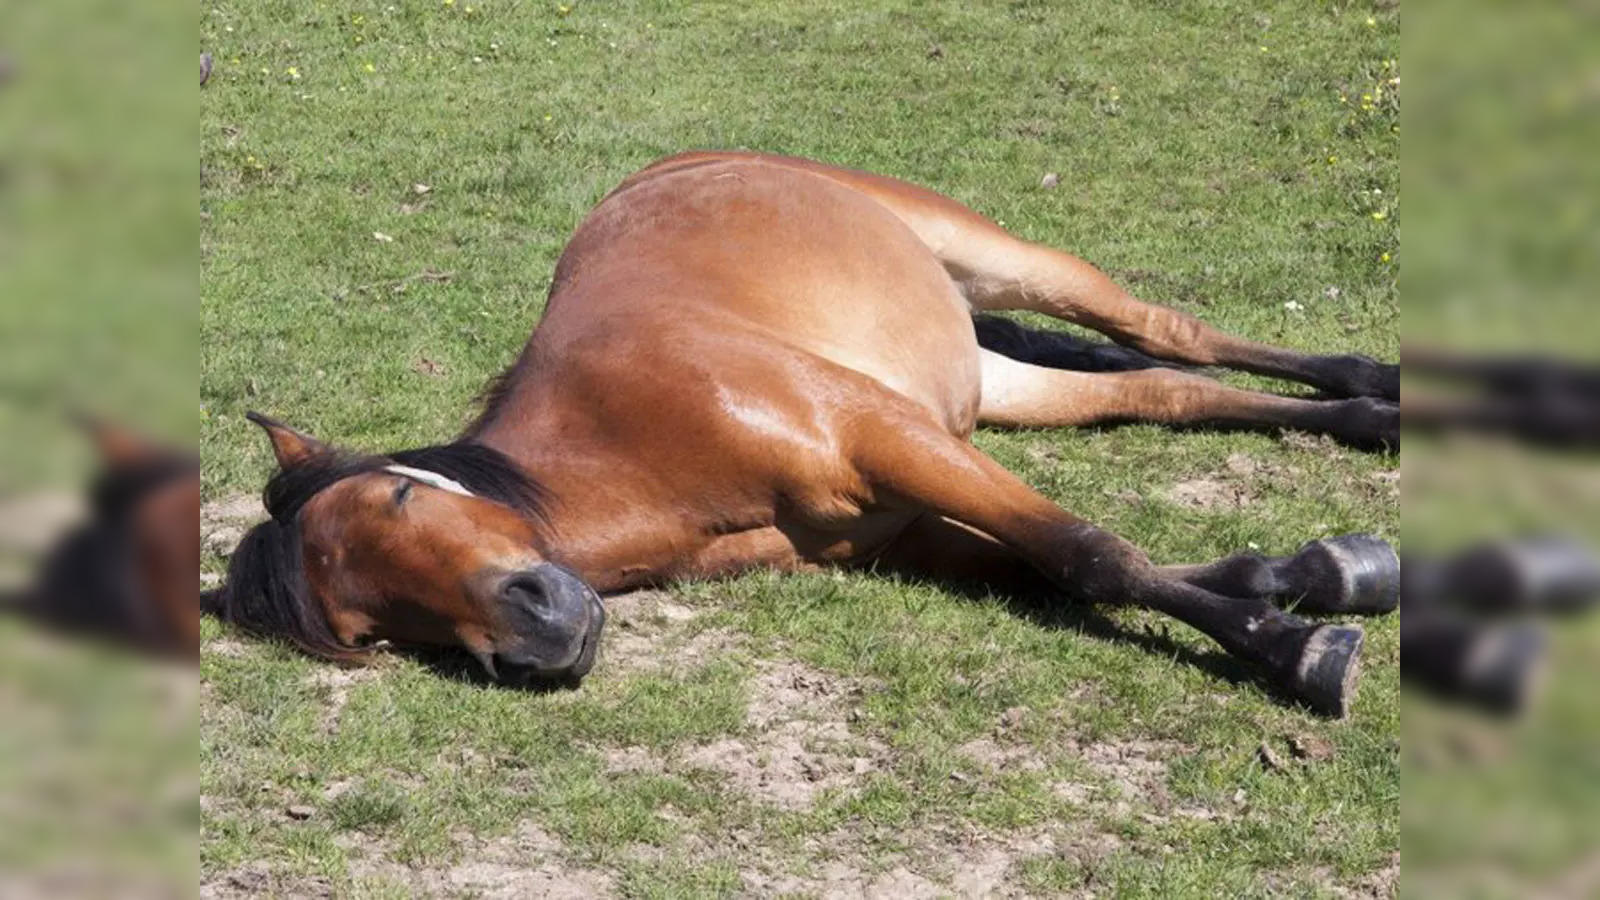 sugar the horse: Internet set abuzz by horse that pretends to fall asleep  as soon as a rider approaches - The Economic Times